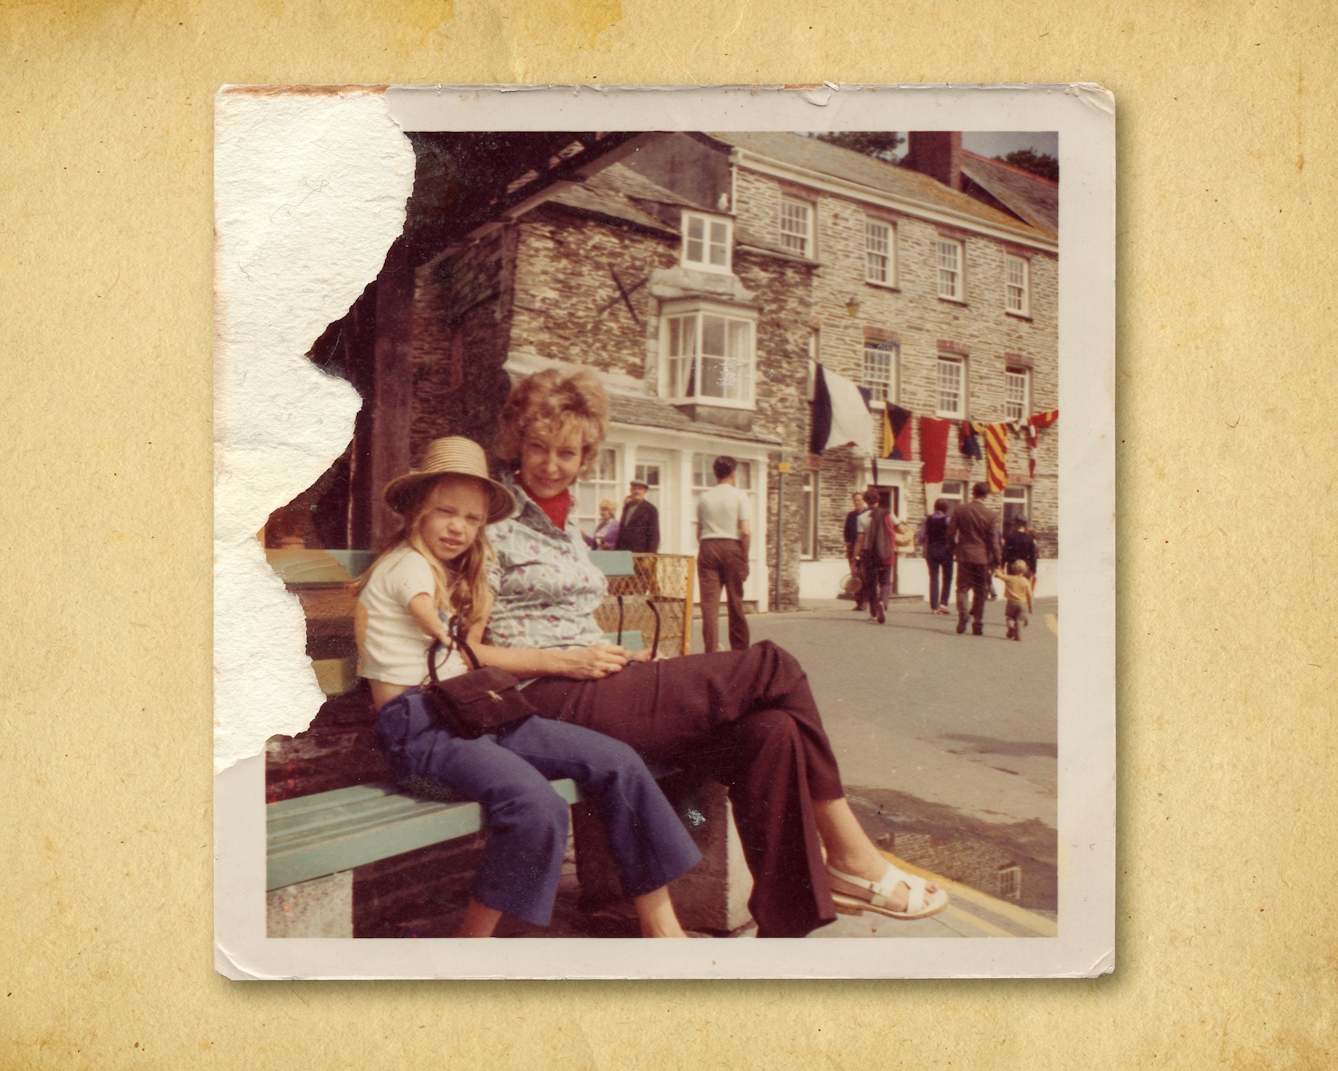 Photograph of a colour photographic print, resting on a brown paper textured background. The print shows a woman sitting on a public bench next to her young daughter. Behind them is large stone built building with a string of large naval flags hung across its facade. There are people in the distance walking toward the building. The mother and daughter on the bench are looking to camera. The daughter is wearing a summer brimmed hat and holding a hand bag in her right hand. The top left corner of the print has been torn such that the surface of the print and therefore the image have been lost.